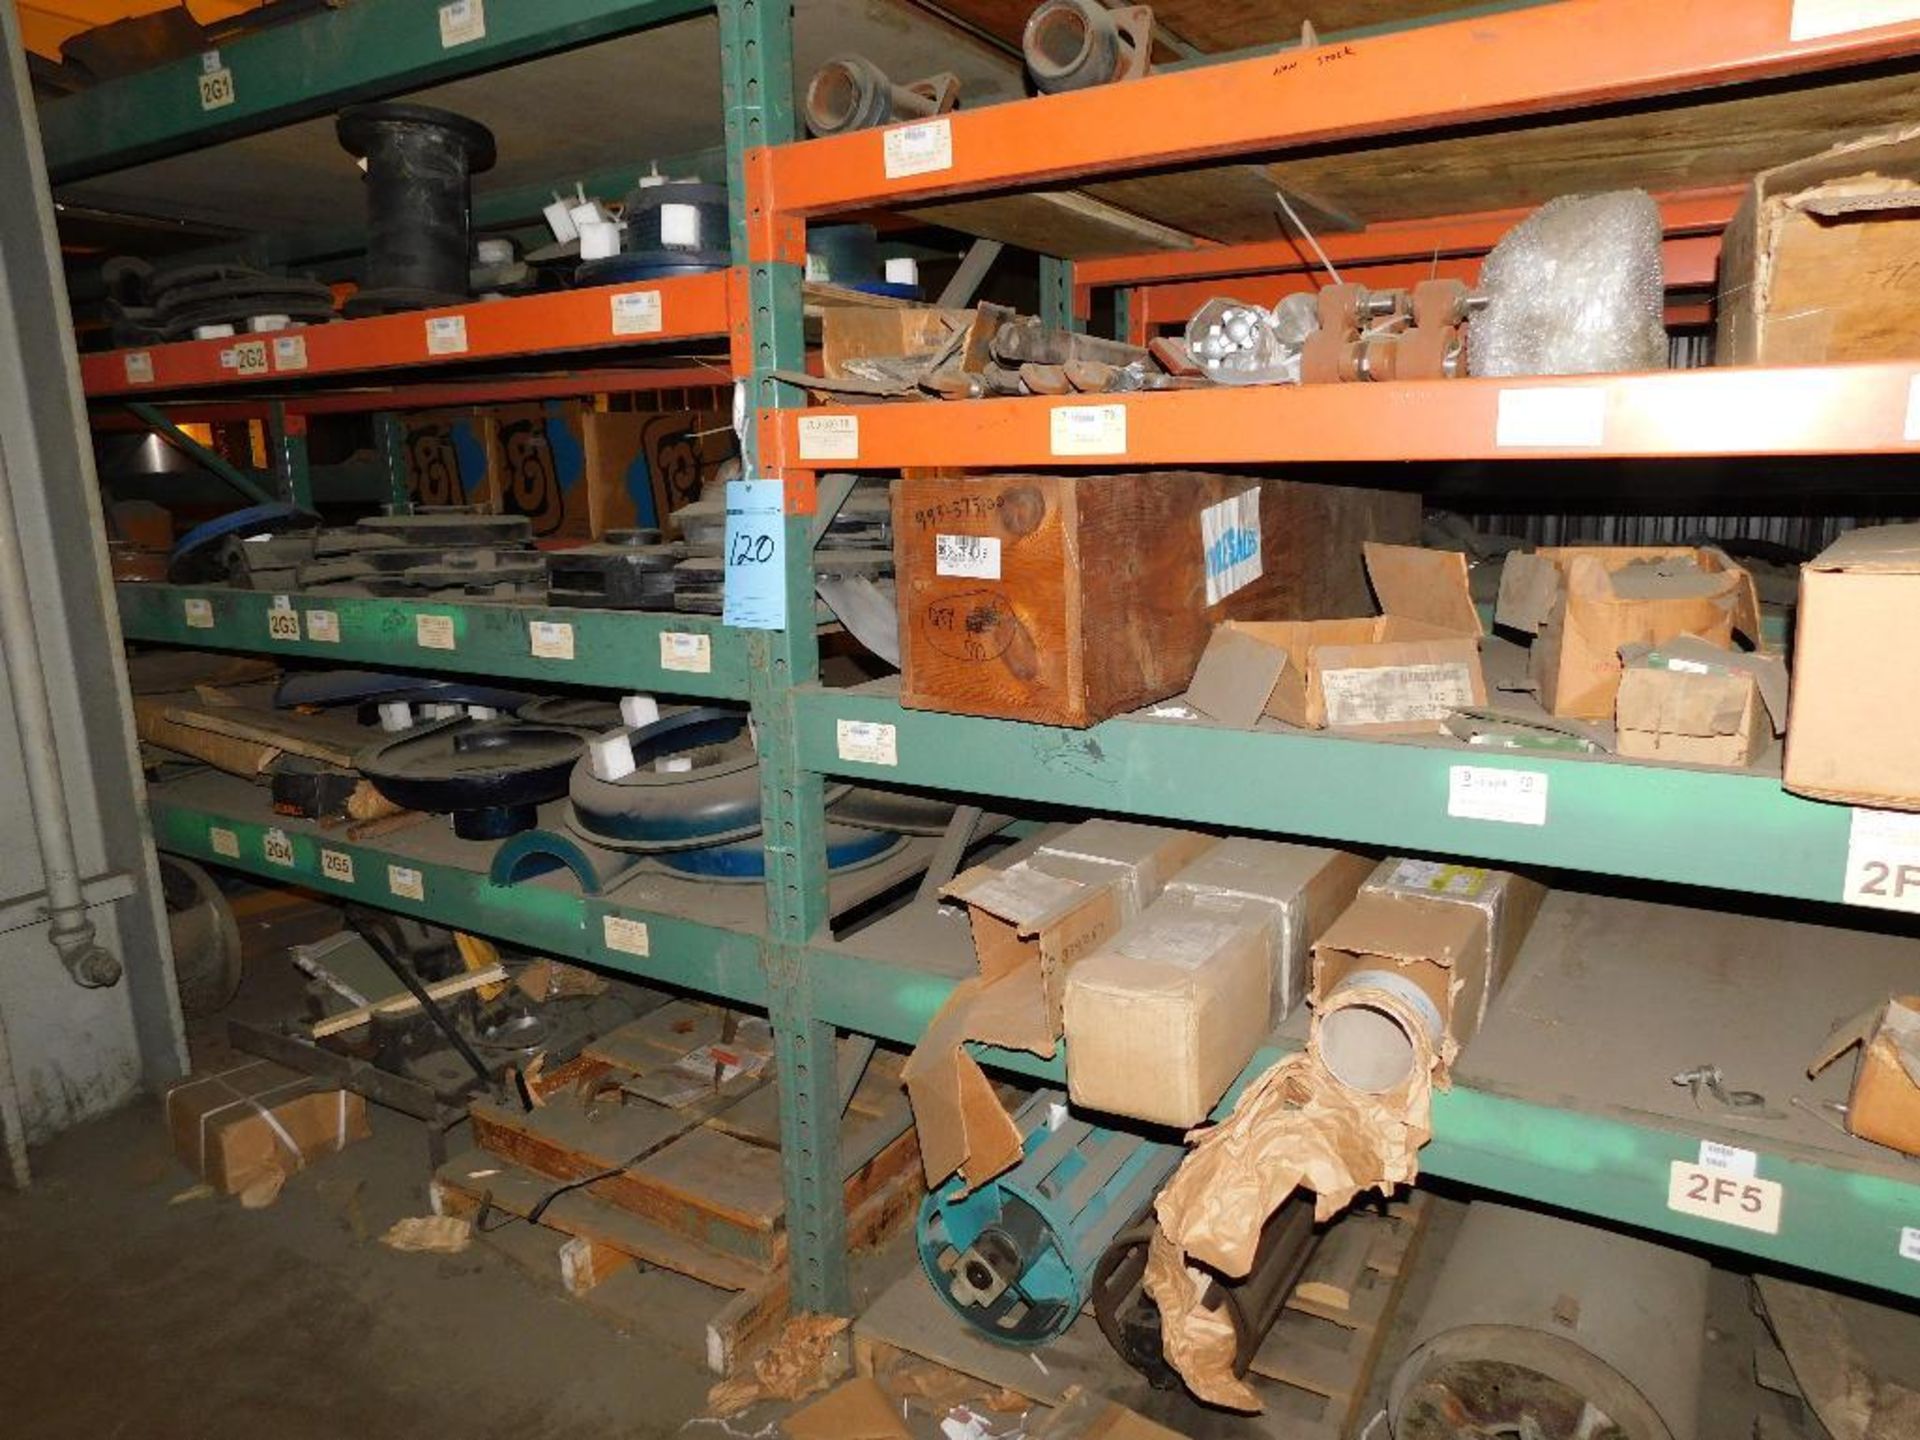 Assortes (2) Ros 8' Pallet Rack with Contents of Conveyor and Pump Parts. - Image 5 of 5